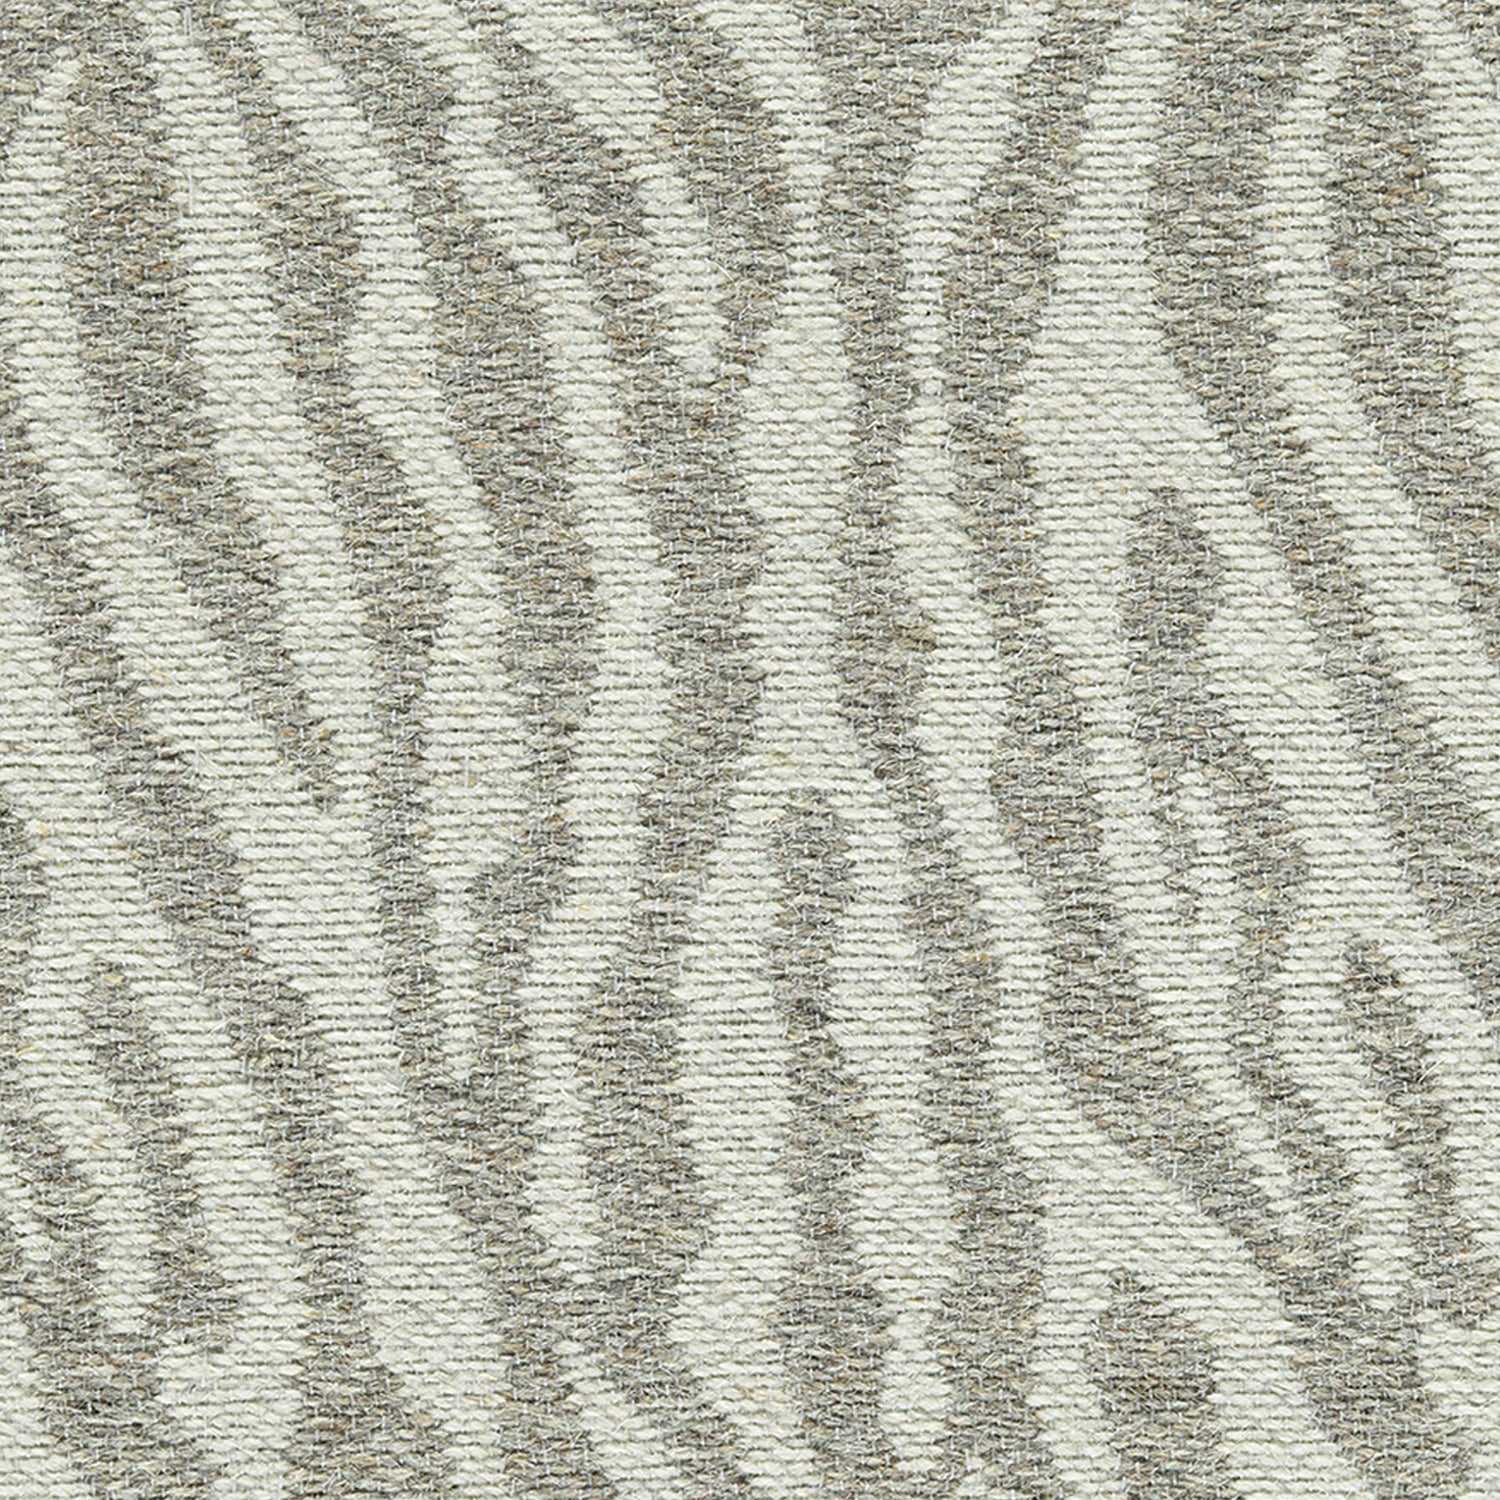 Wool-blend broadloom carpet swatch in a silver and cream tiger print weave.